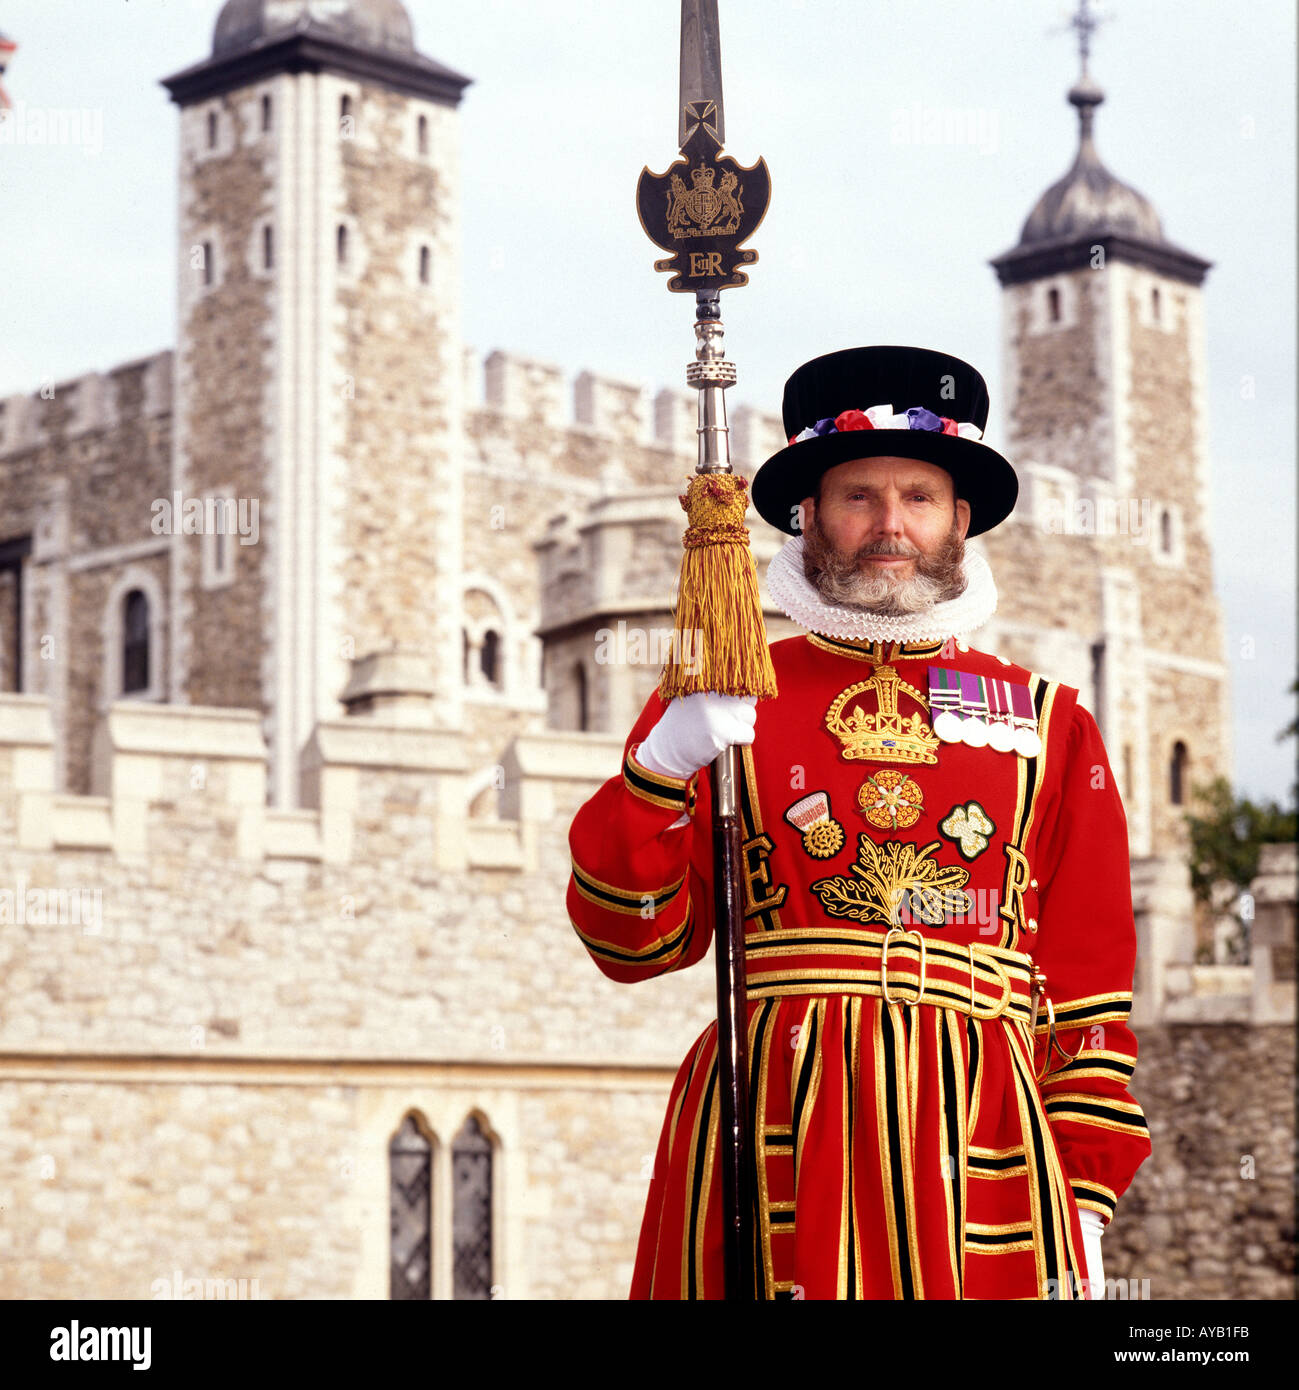 Yeoman Beefeater Guard in Ceremonial Uniform at the Tower of London UK Stock Photo